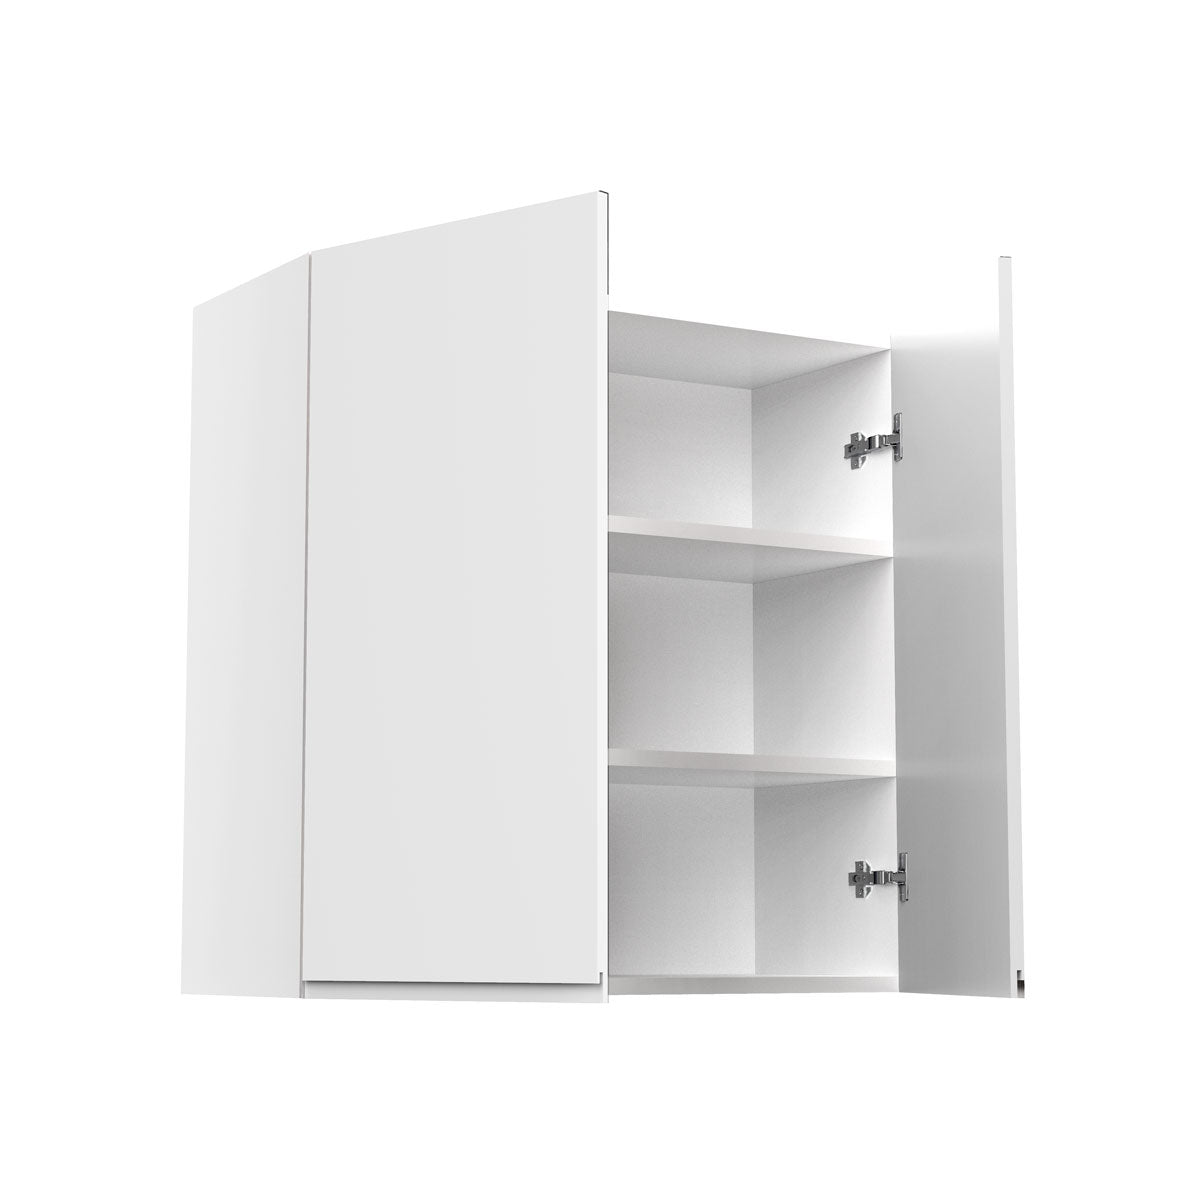 Kitchen Wall Cabinet - RTA - Lacquer white - 2 Door Wall Cabinet | 27"W x 30"H x 12"D